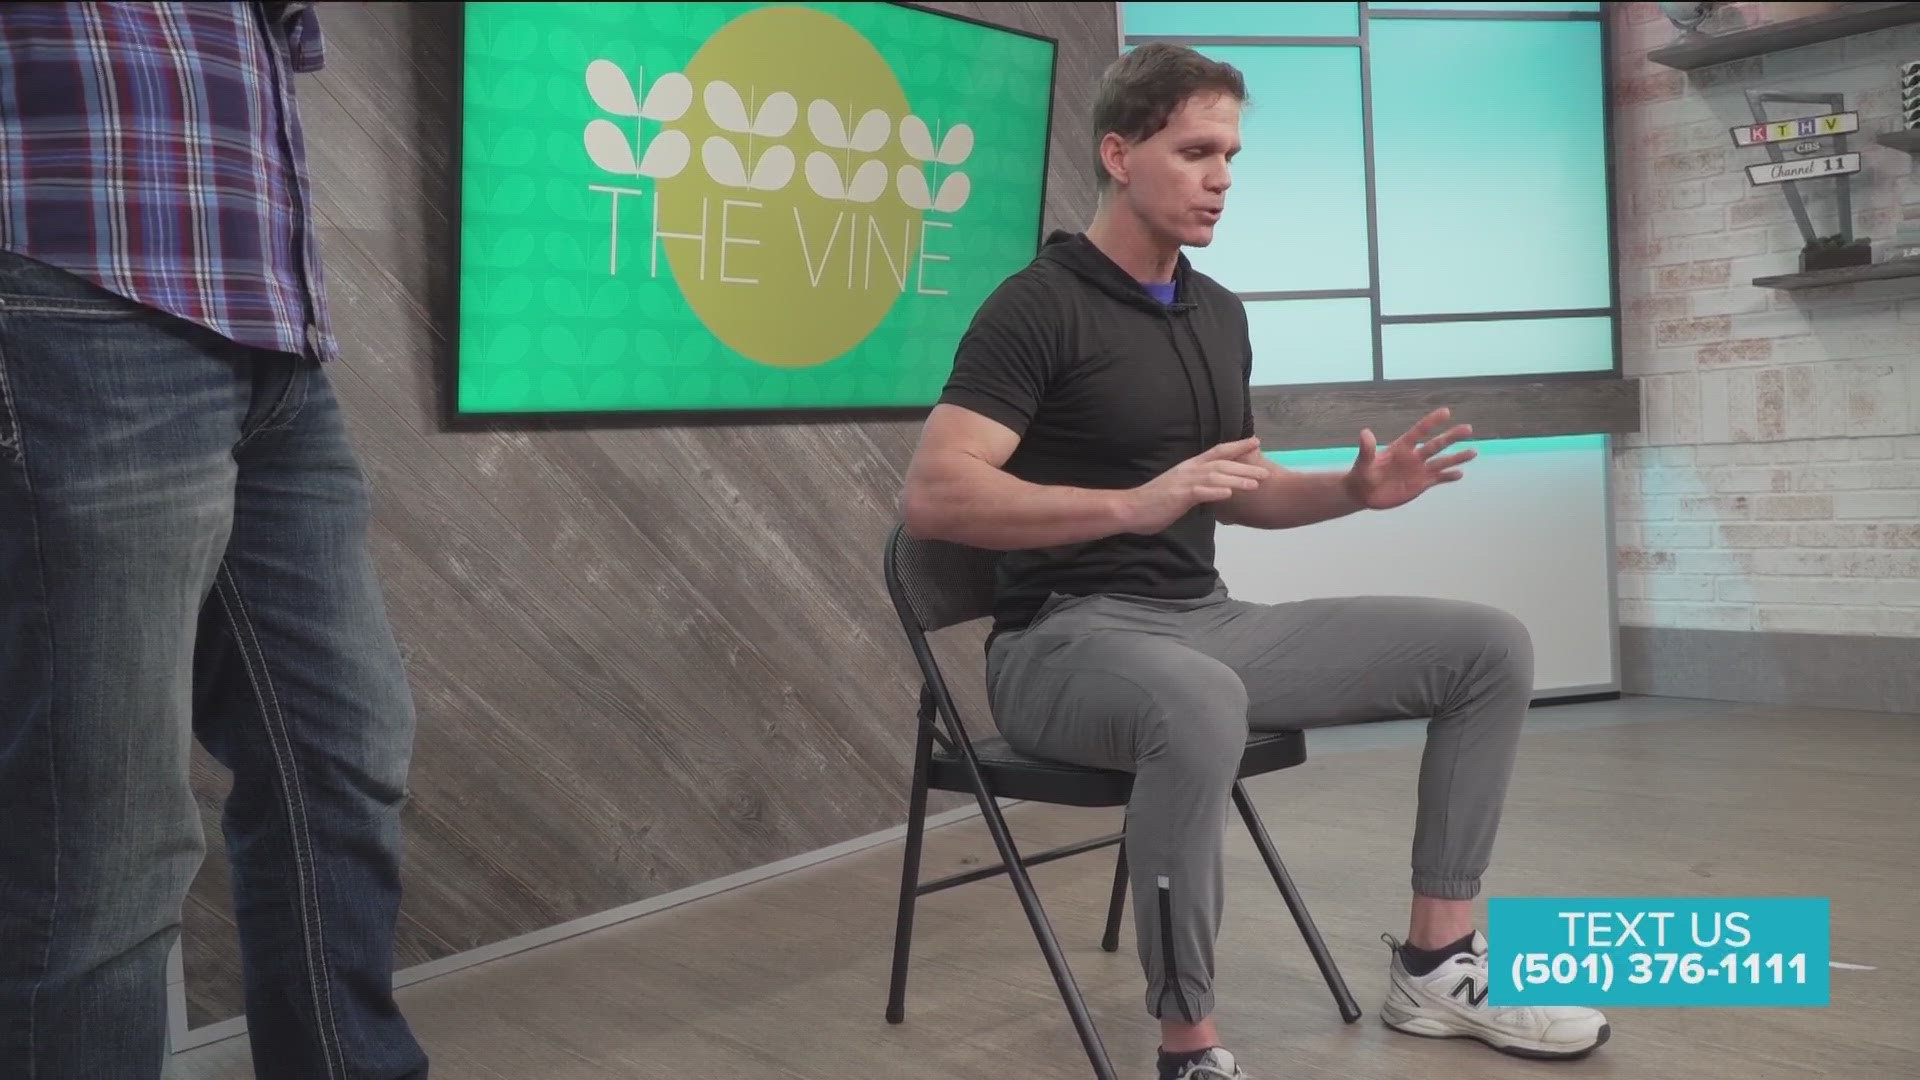 Jeff McDaniel from Fast Fit, is shows us some exercises you can do with a chair.